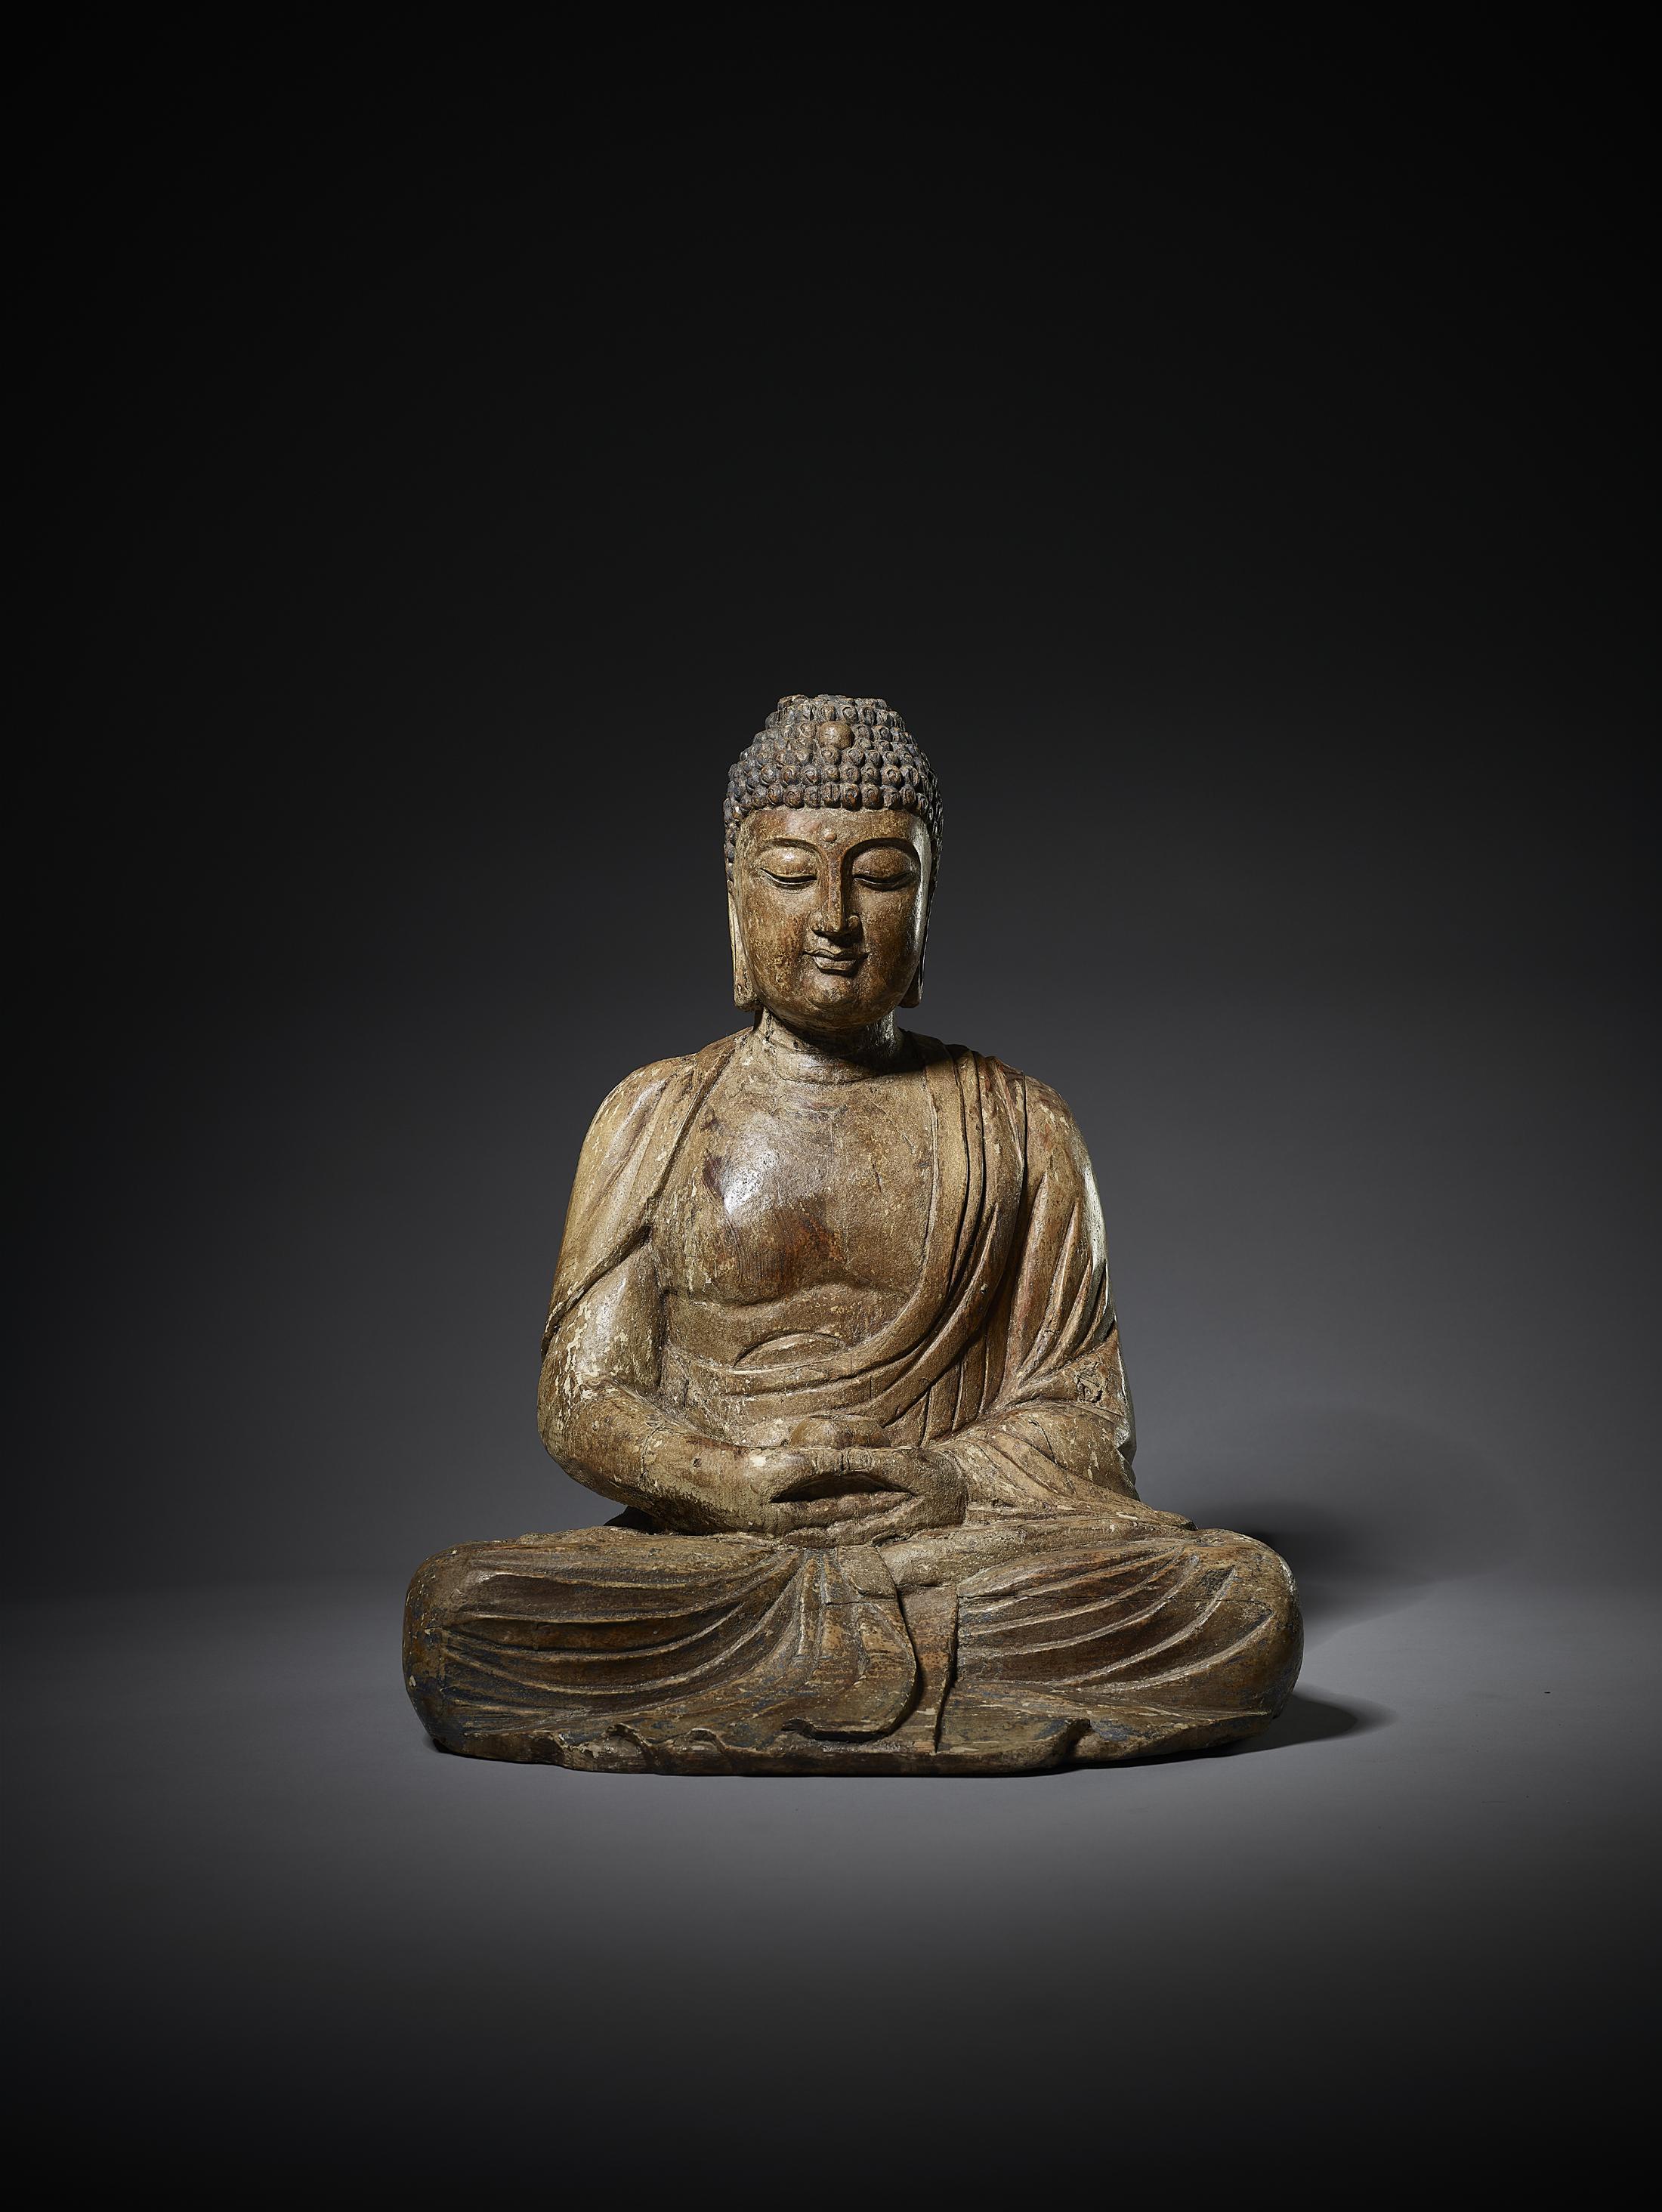 A LARGE CARVED WOODEN FIGURE OF BUDDHA, MING DYNASTY （1368-1644）

China, 1368-1644. Seated in dhyanasana, the arms lowered in dhyanamudra, holding an alms bowl, wearing long robes falling into voluminous folds and opening at the chest, the face with